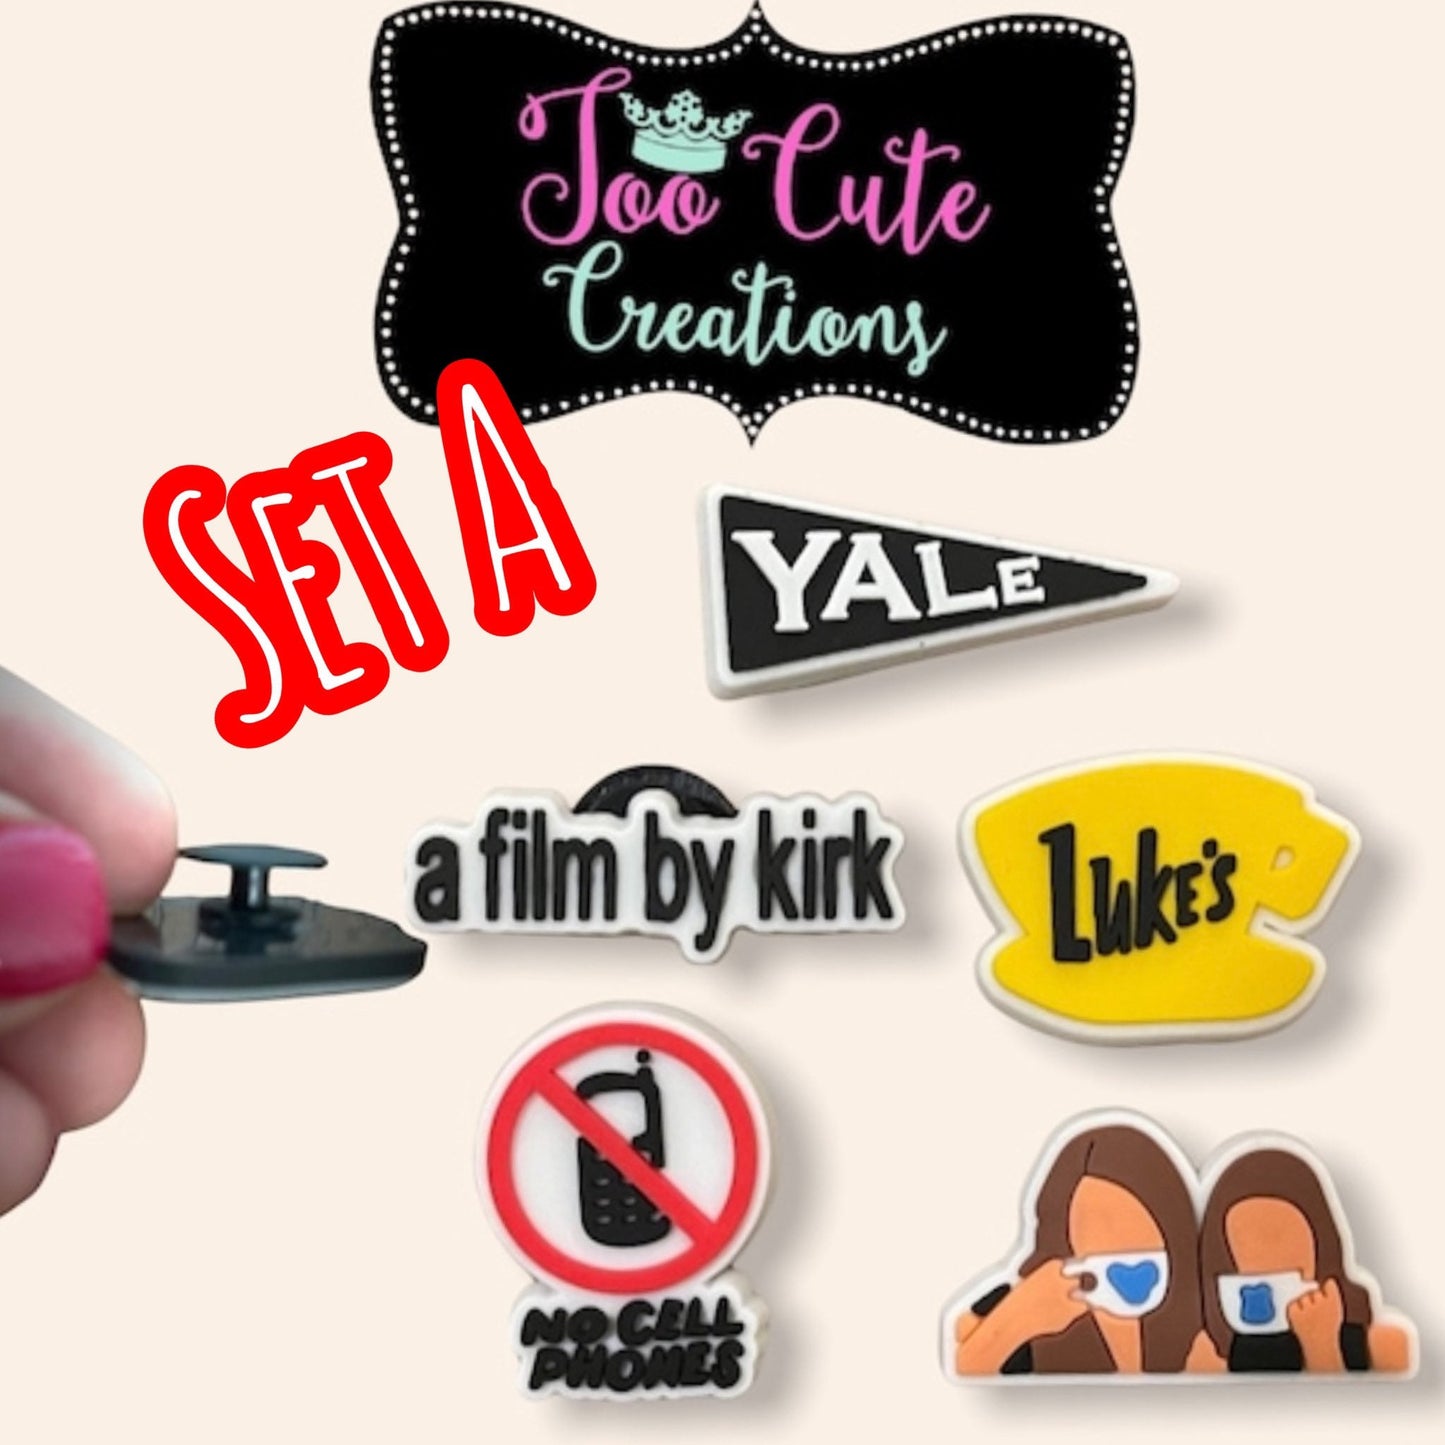 Gilmore Girls Shoe Charms, TV Series, Luke’s/a film by Kirk